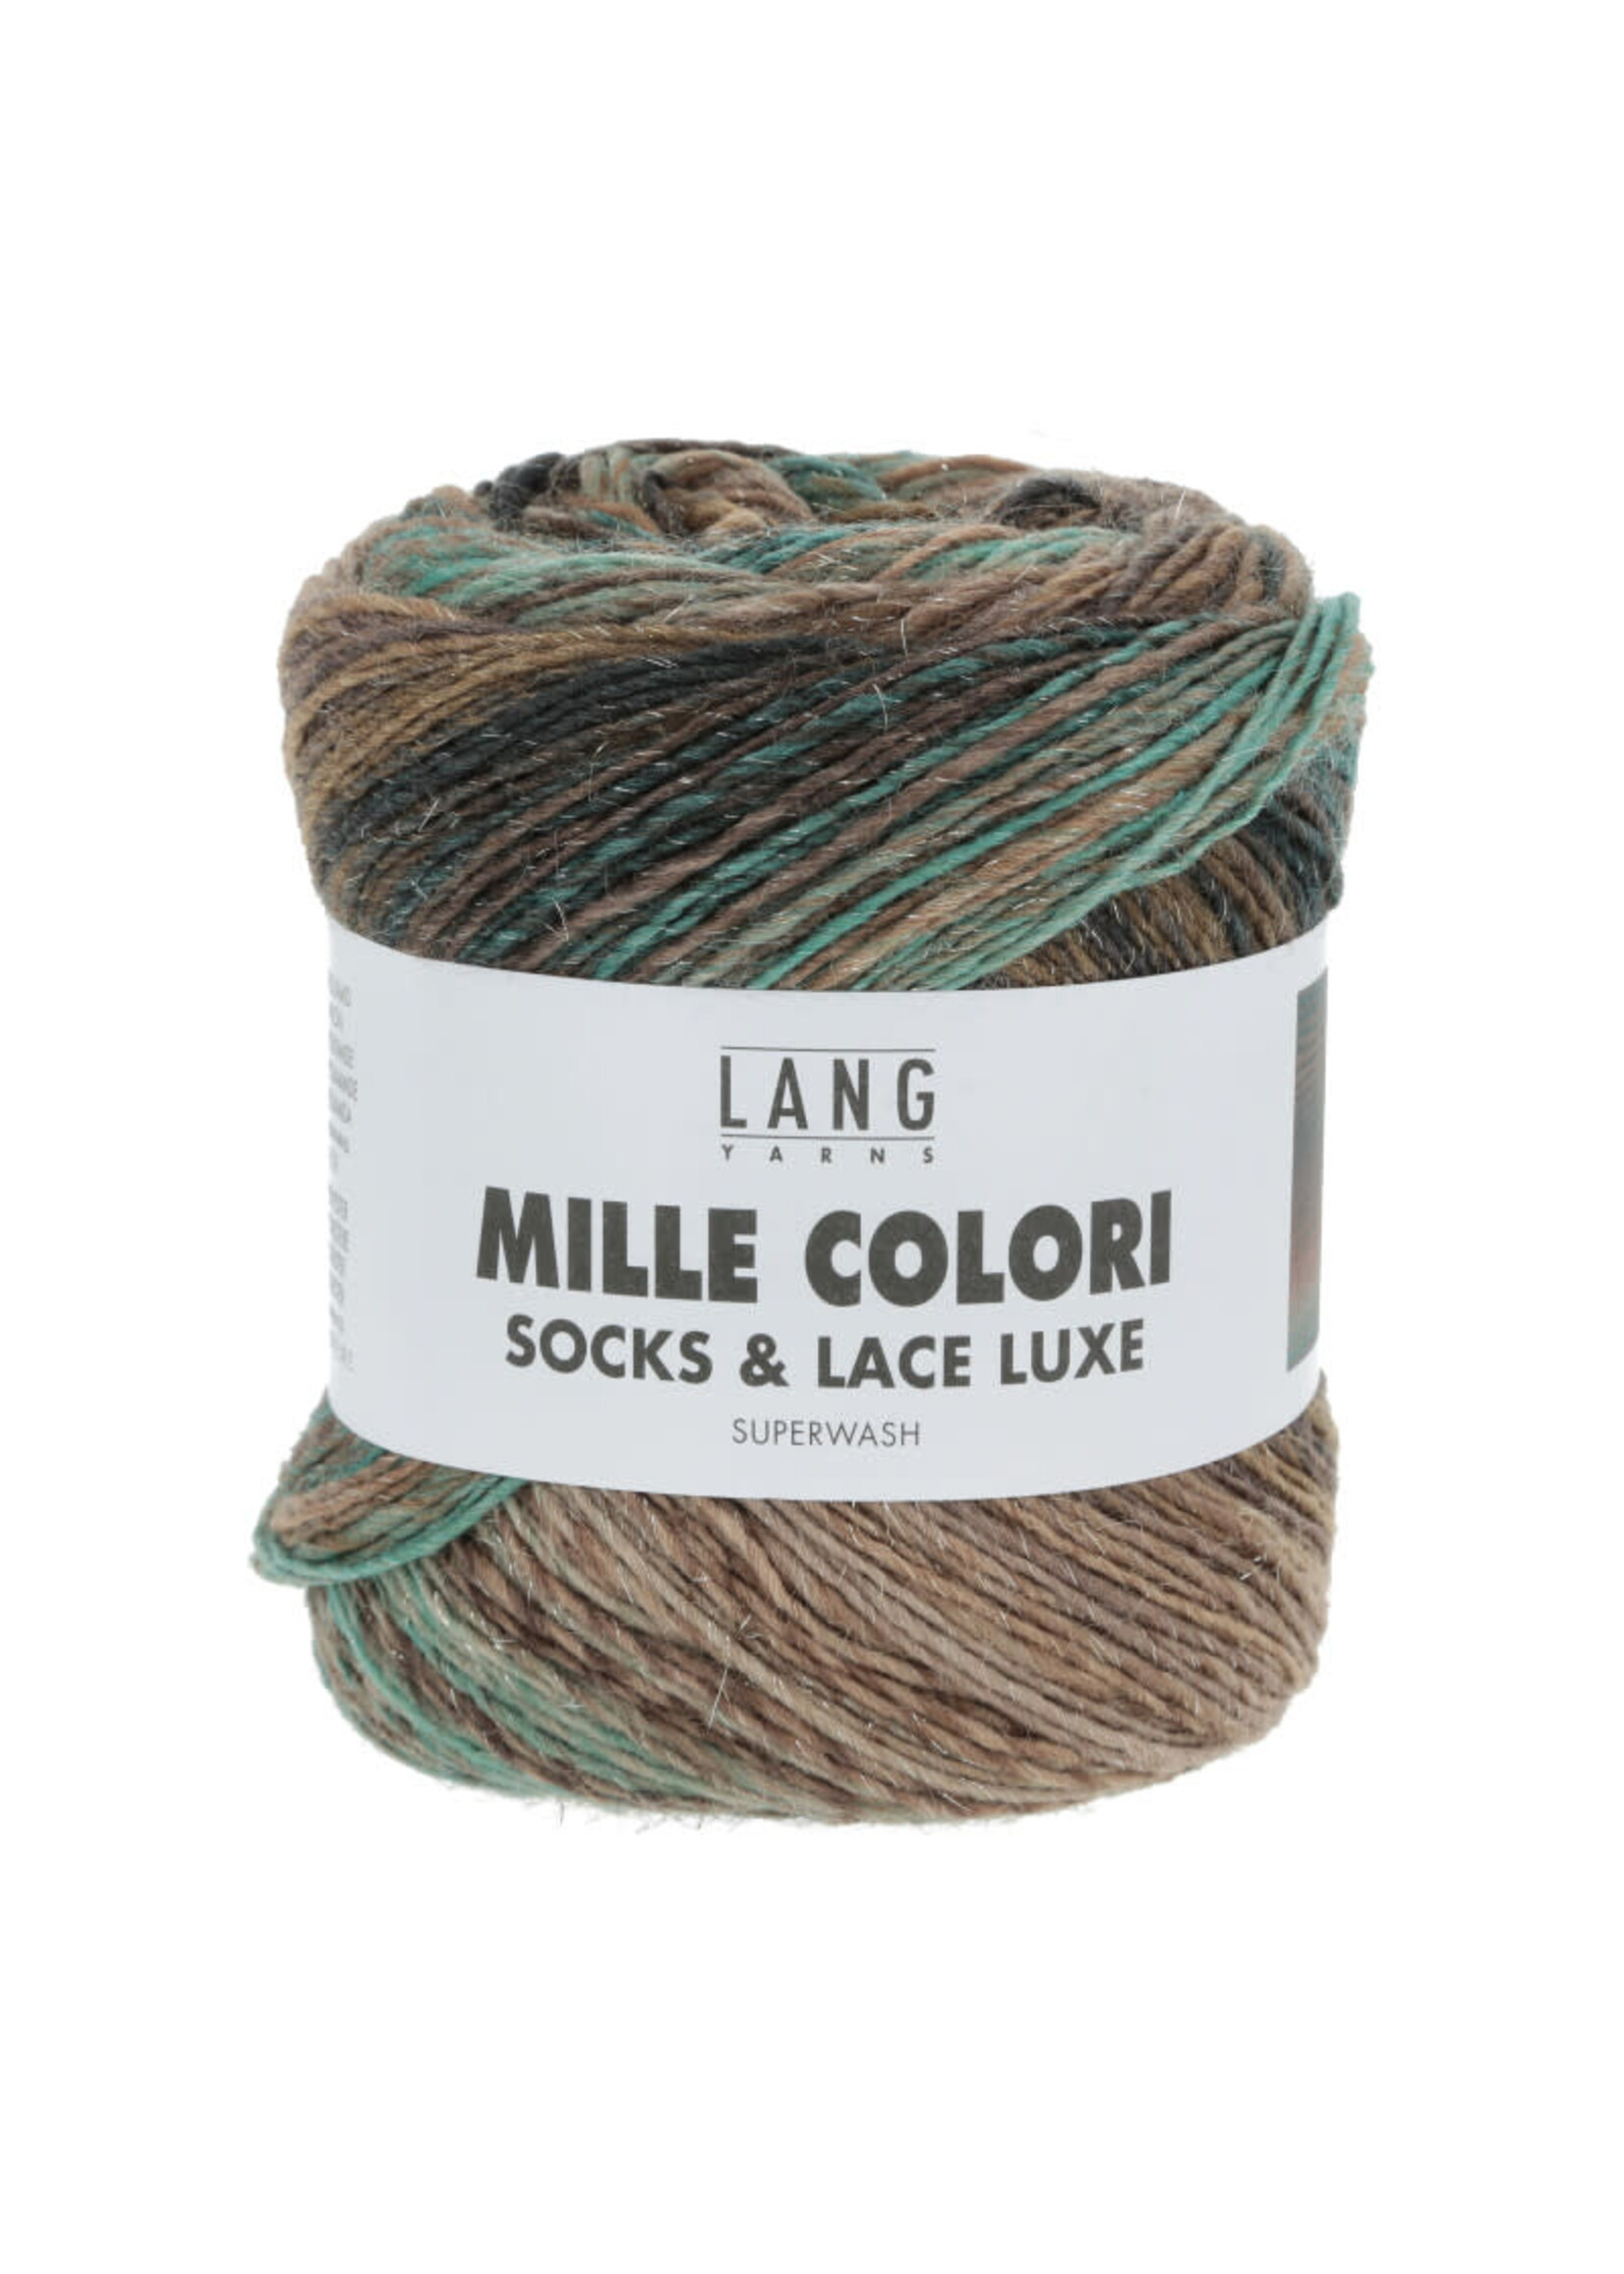 LangYarns Mille Colori Socks & Lace Luxe - 0205 bruin/petrol/turquoise